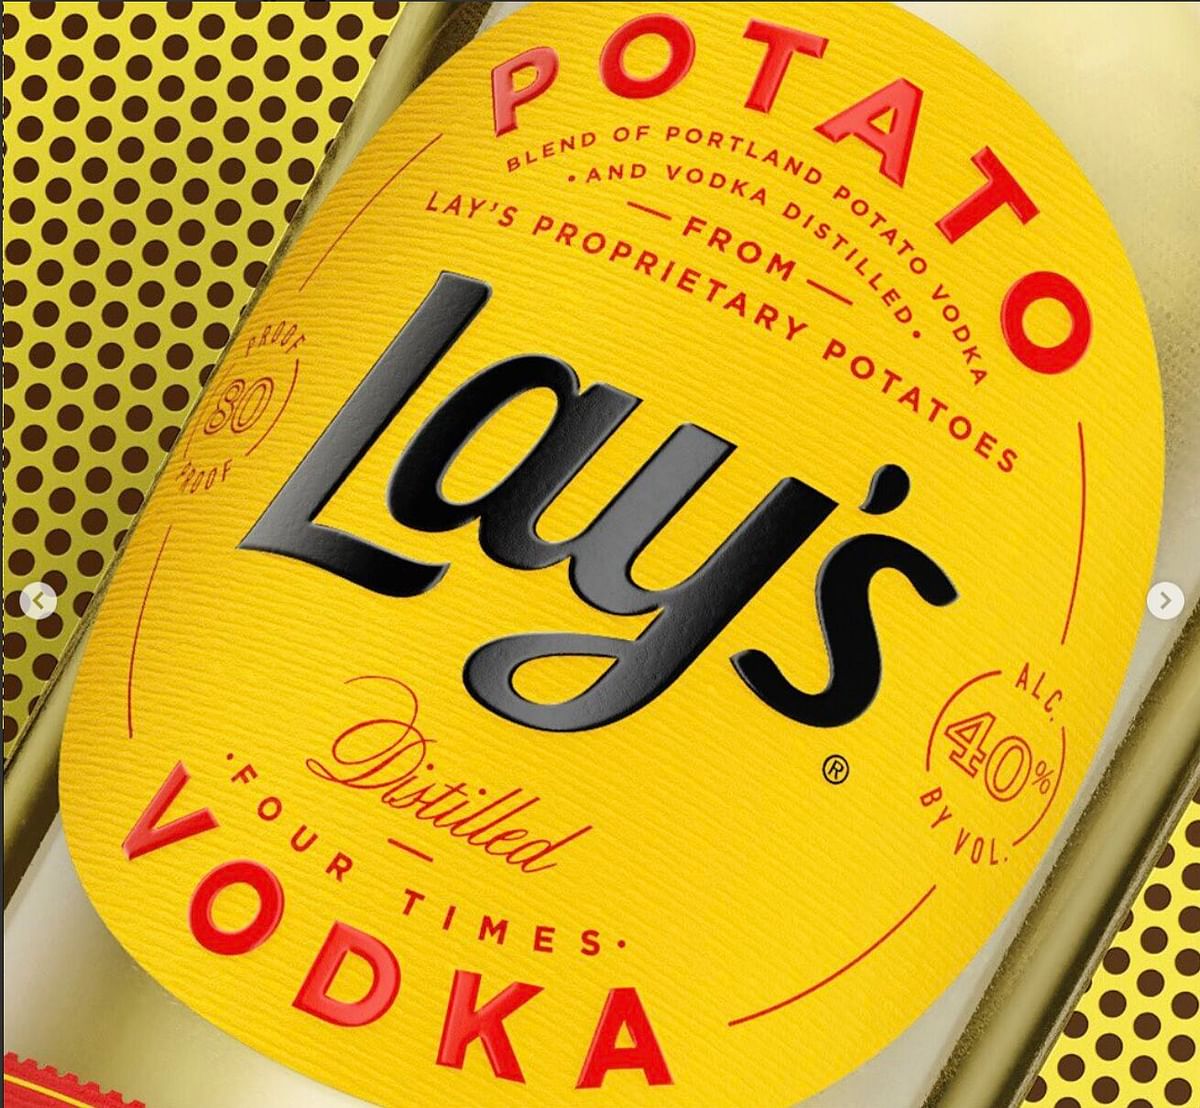 A Lay’s flavoured Vodka? Now, that’s a Christmas miracle